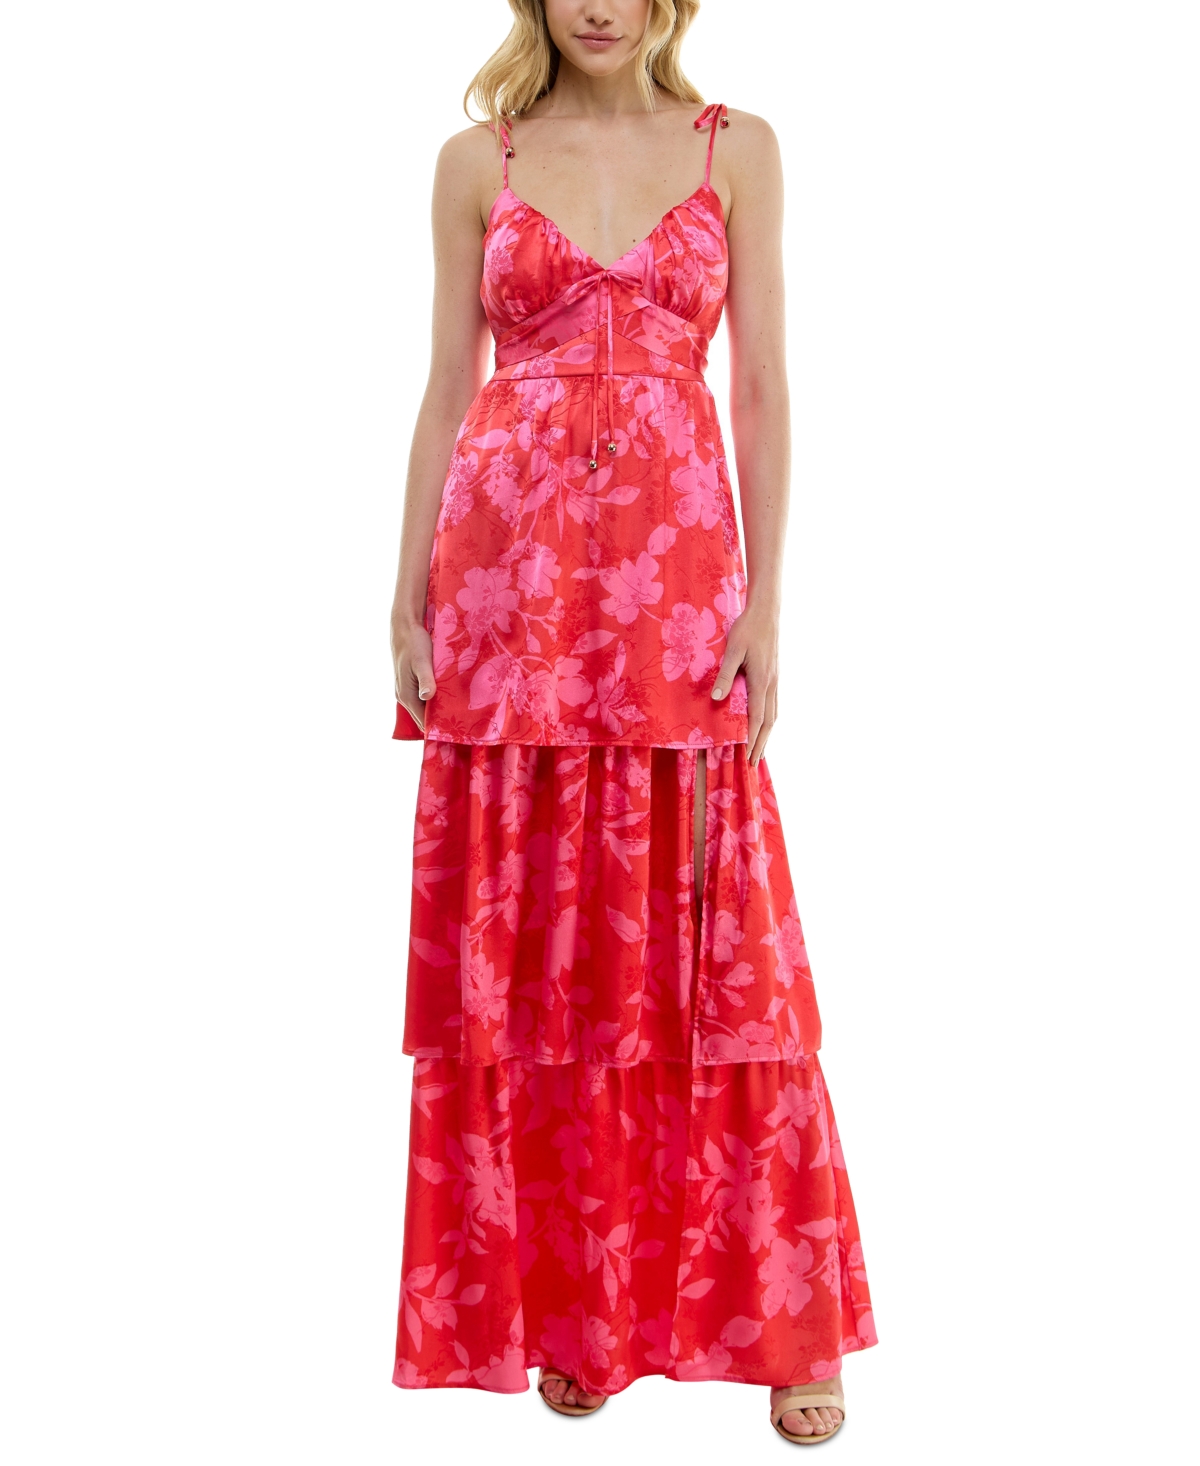 Juniors' Floral Tie-Strap Tiered Maxi Dress - Red/pink